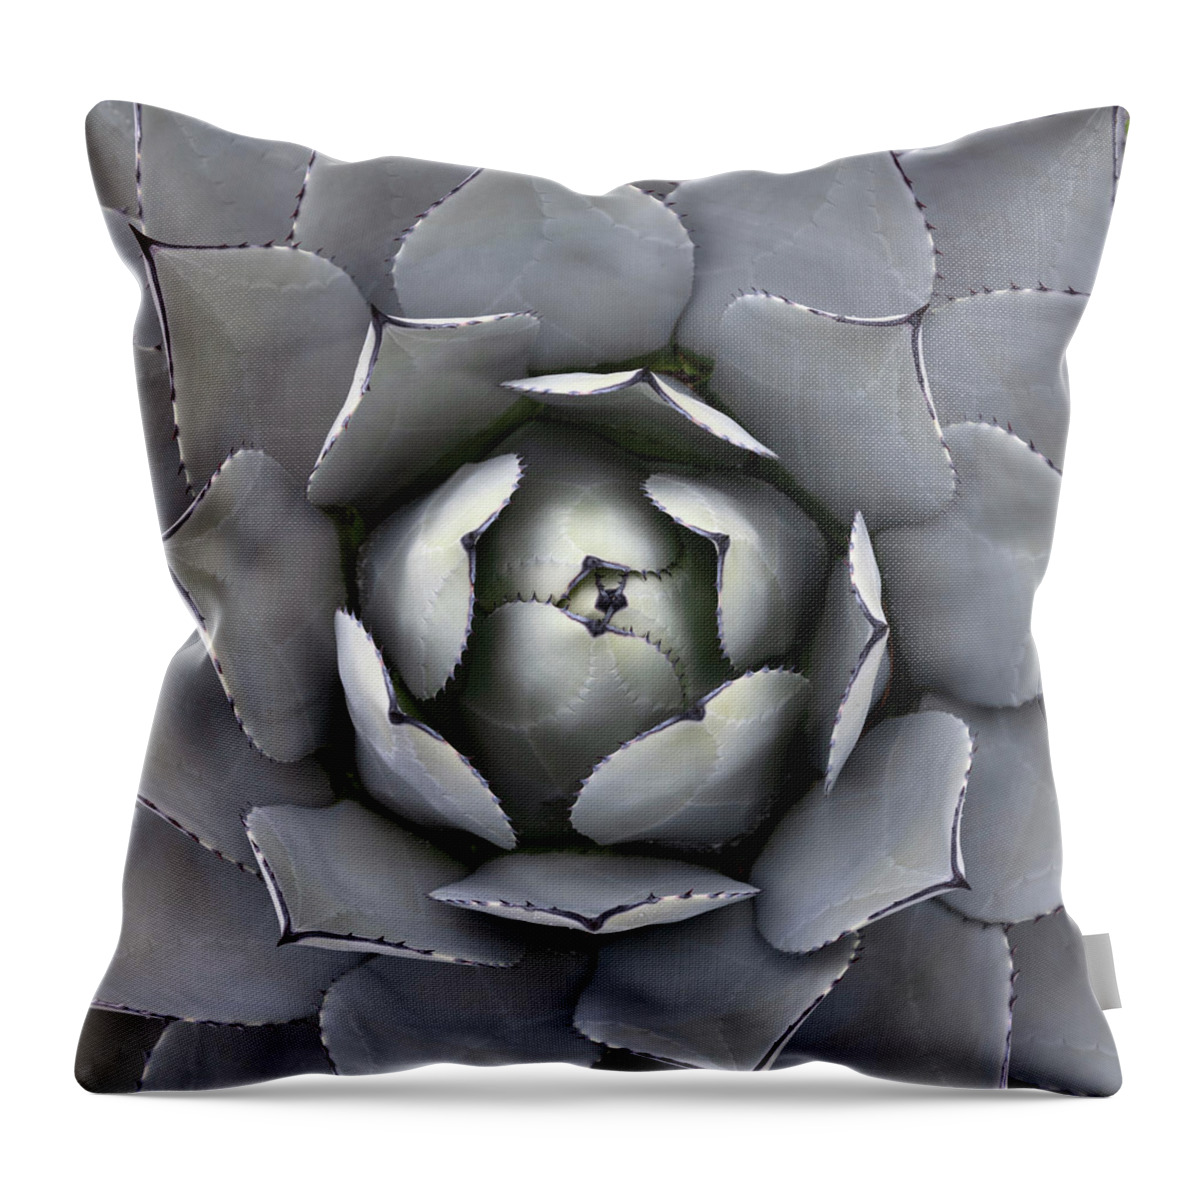 Succulent Throw Pillow featuring the photograph Looking Down on an Artichoke Agave by William Dunigan